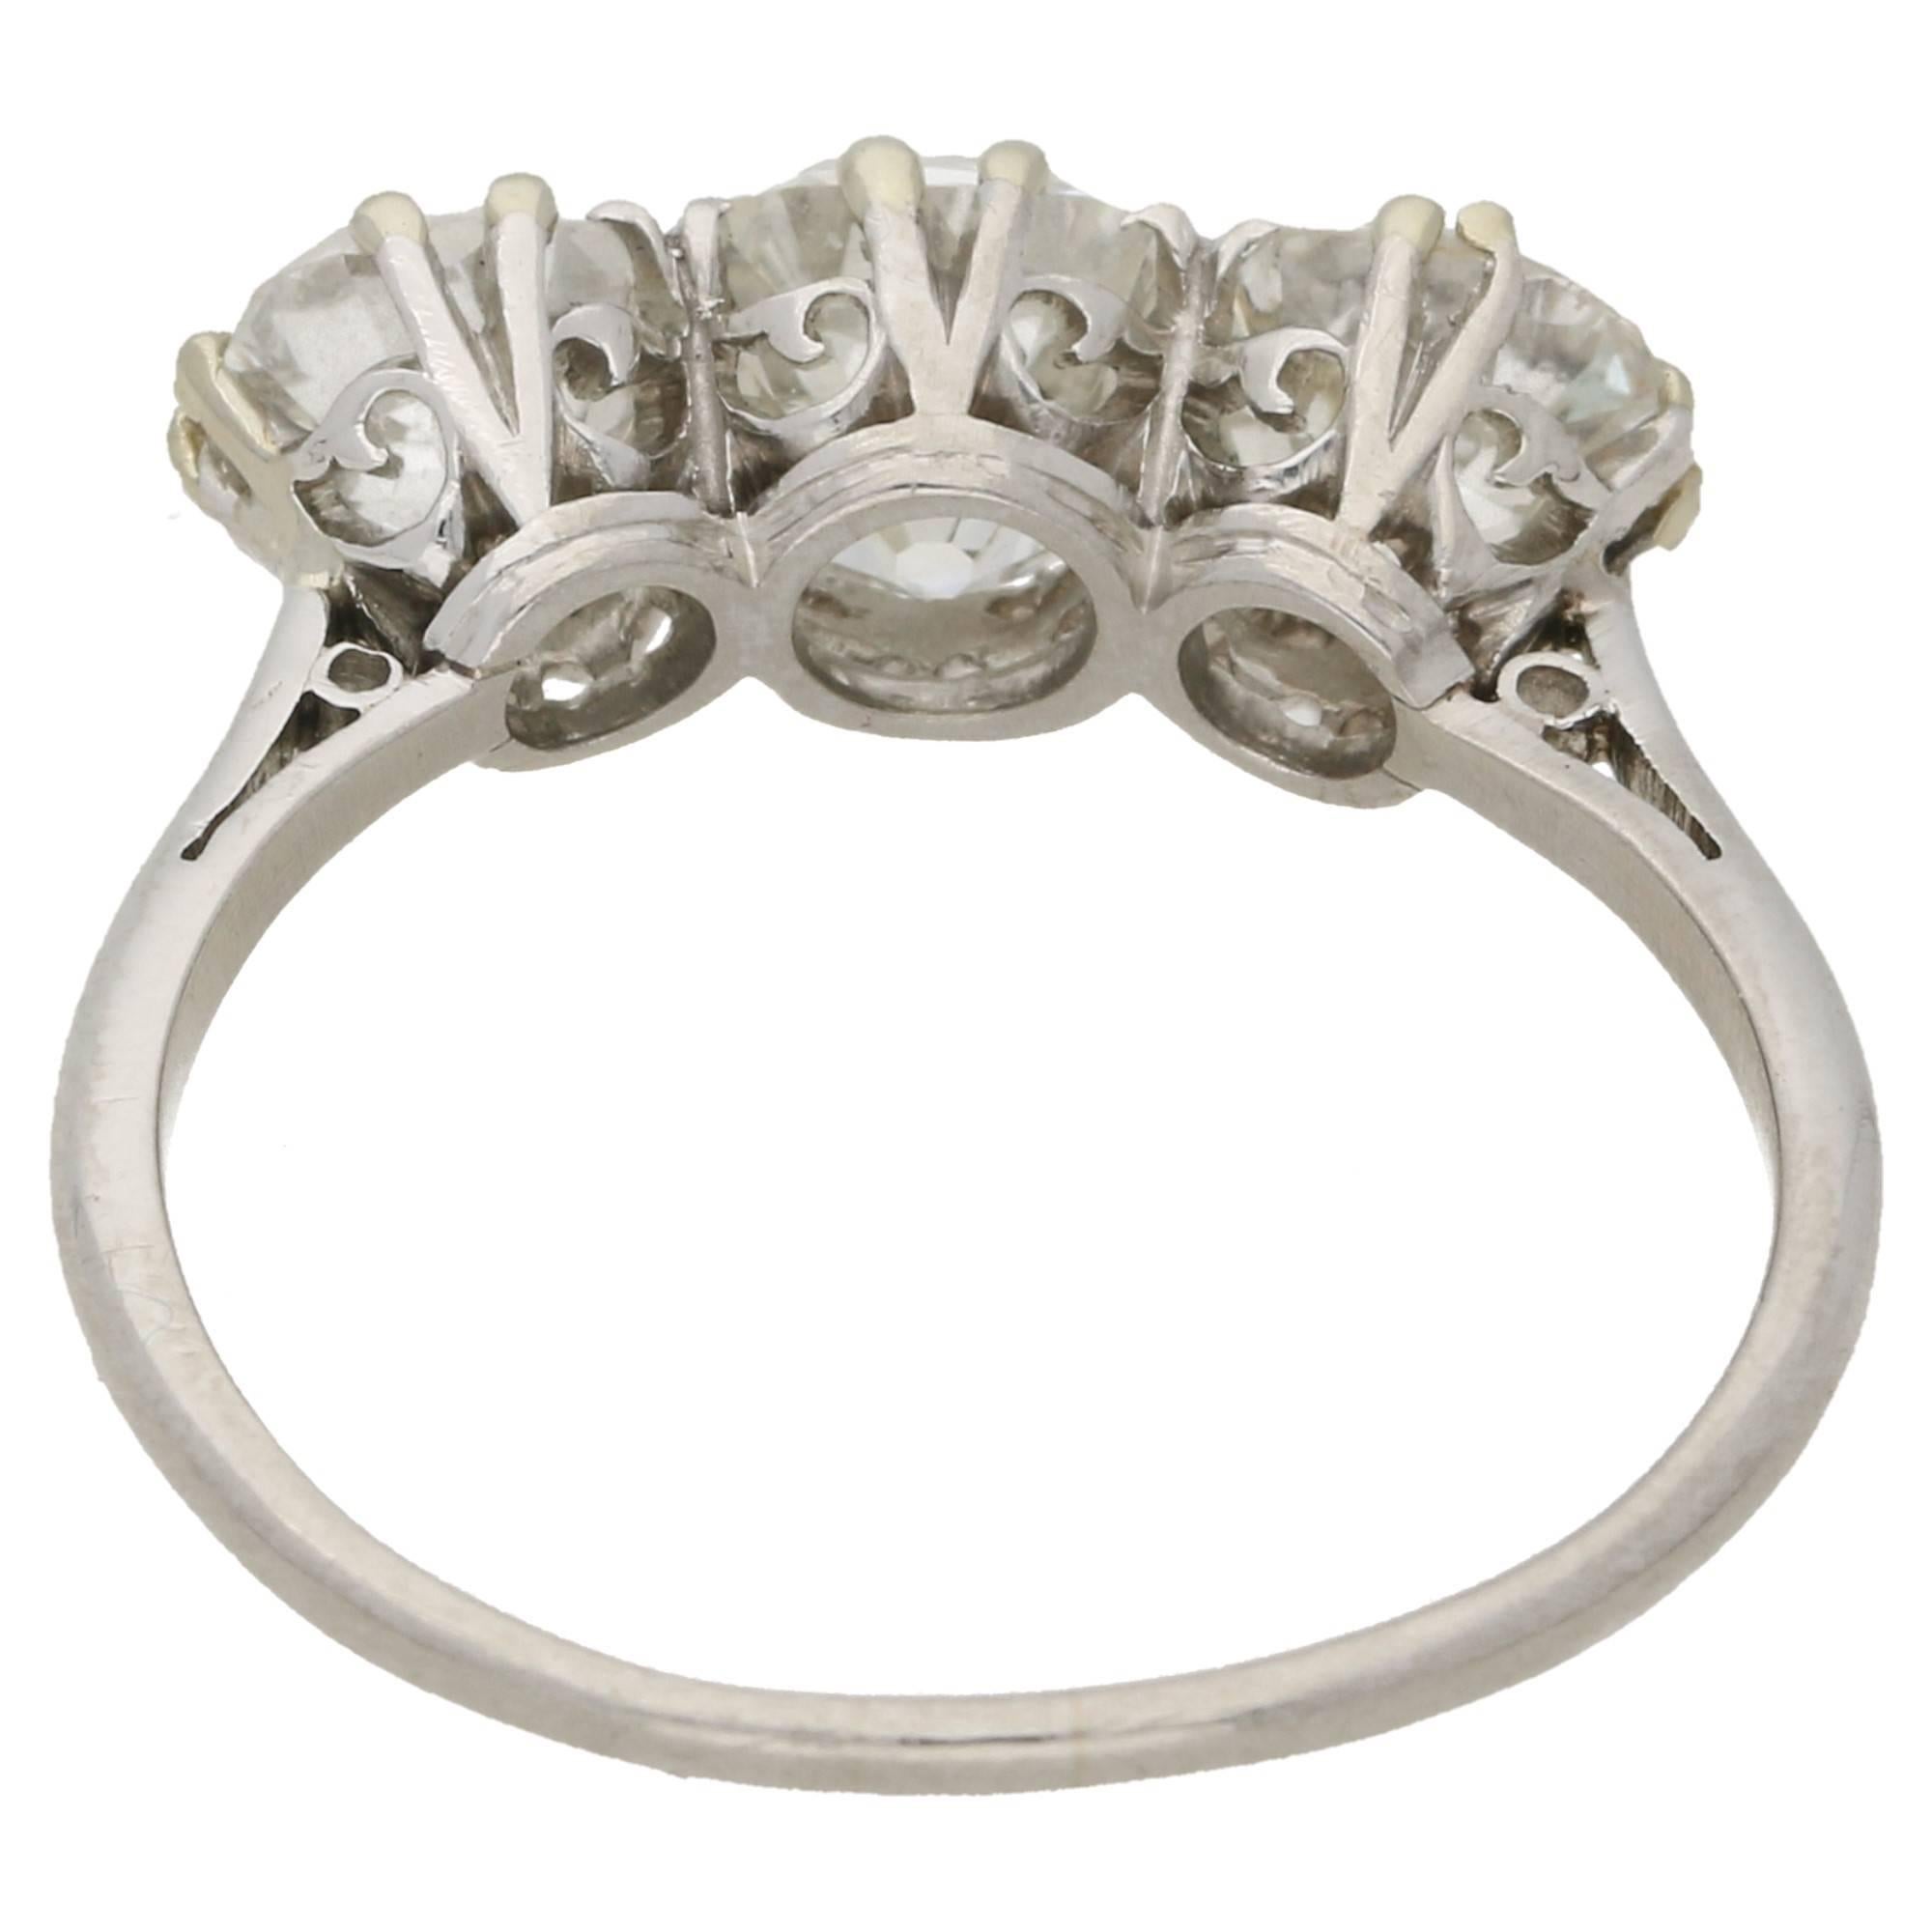 A stunning Edwardian three stone Old European cut diamond ring set in platinum. The Old European cut diamonds are split claw set, with stylised hearts adorning the undercarriage, embellished with open cheniers. Estimated total diamond weight: